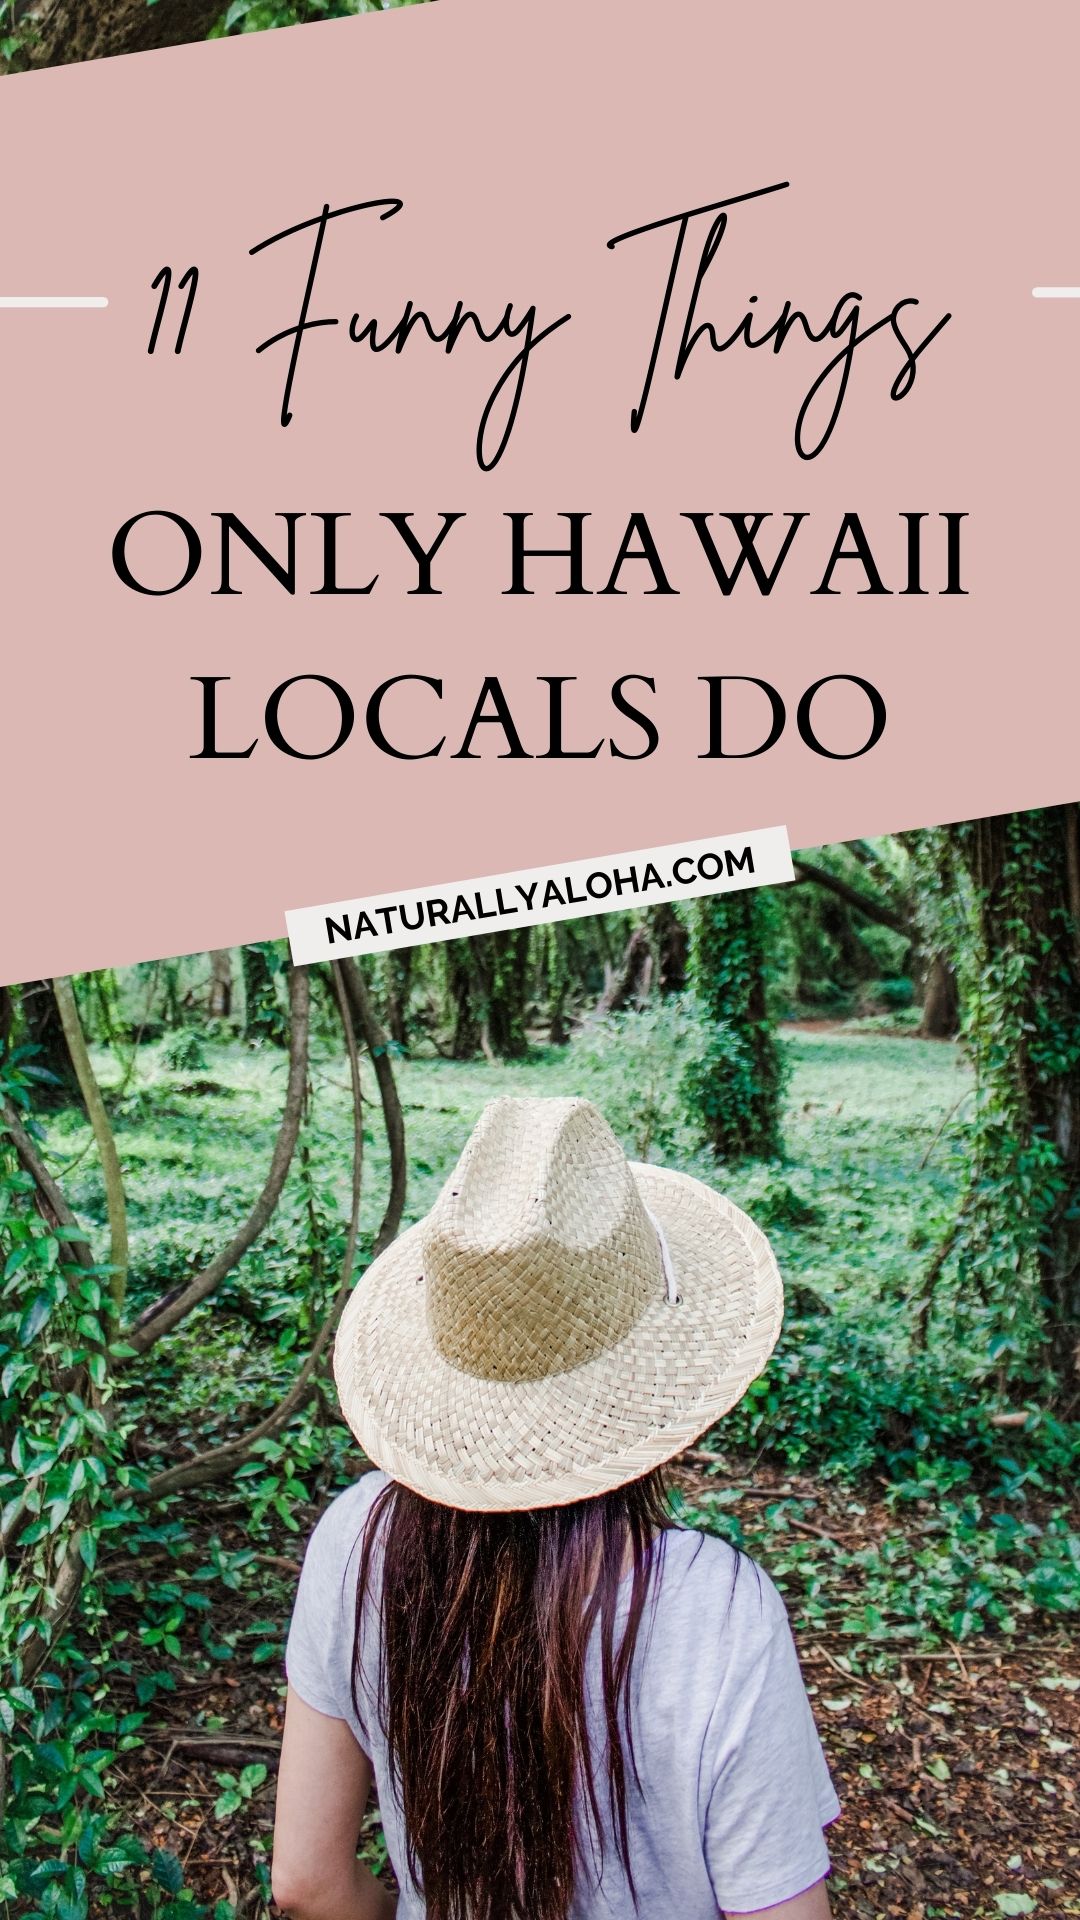 11 Interesting Things Hawaii Locals Do (That Others Don't